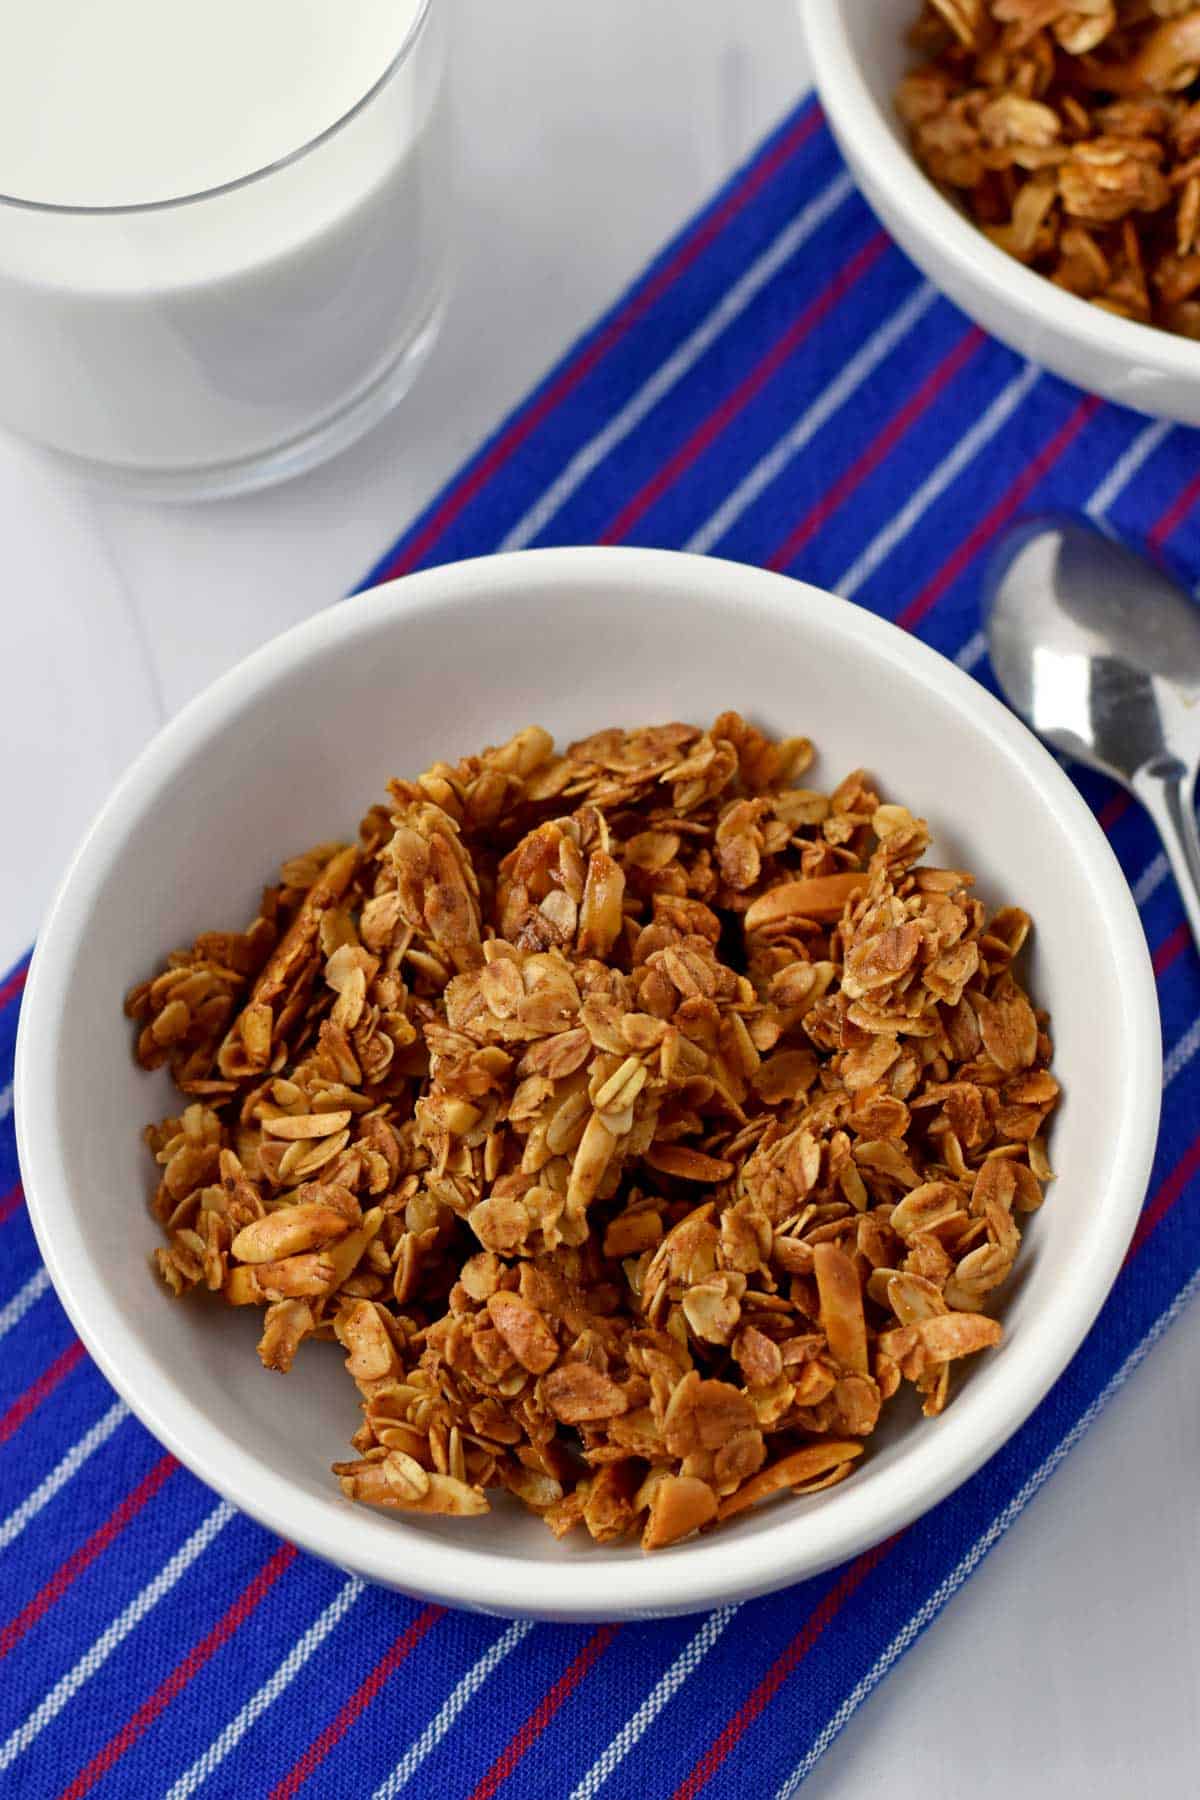 A bowl of vanilla almond granola with a glass of milk and more granola in the background.